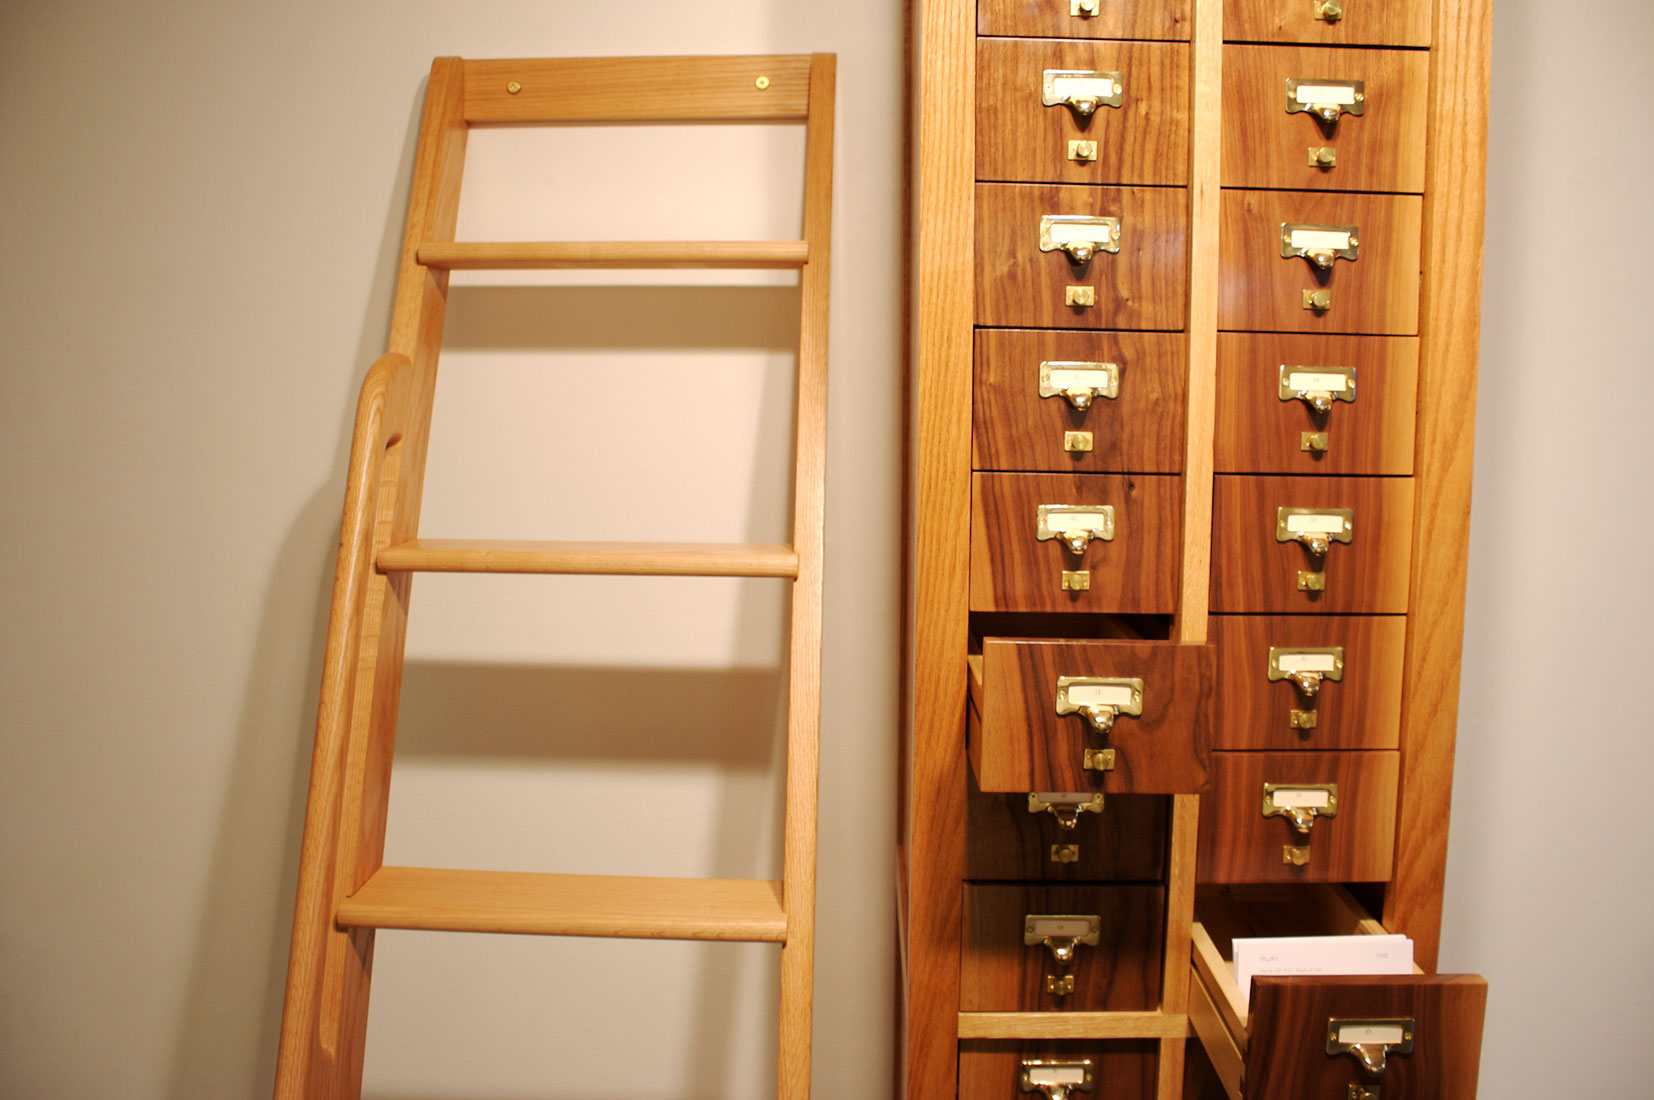 Catalog and ladder.